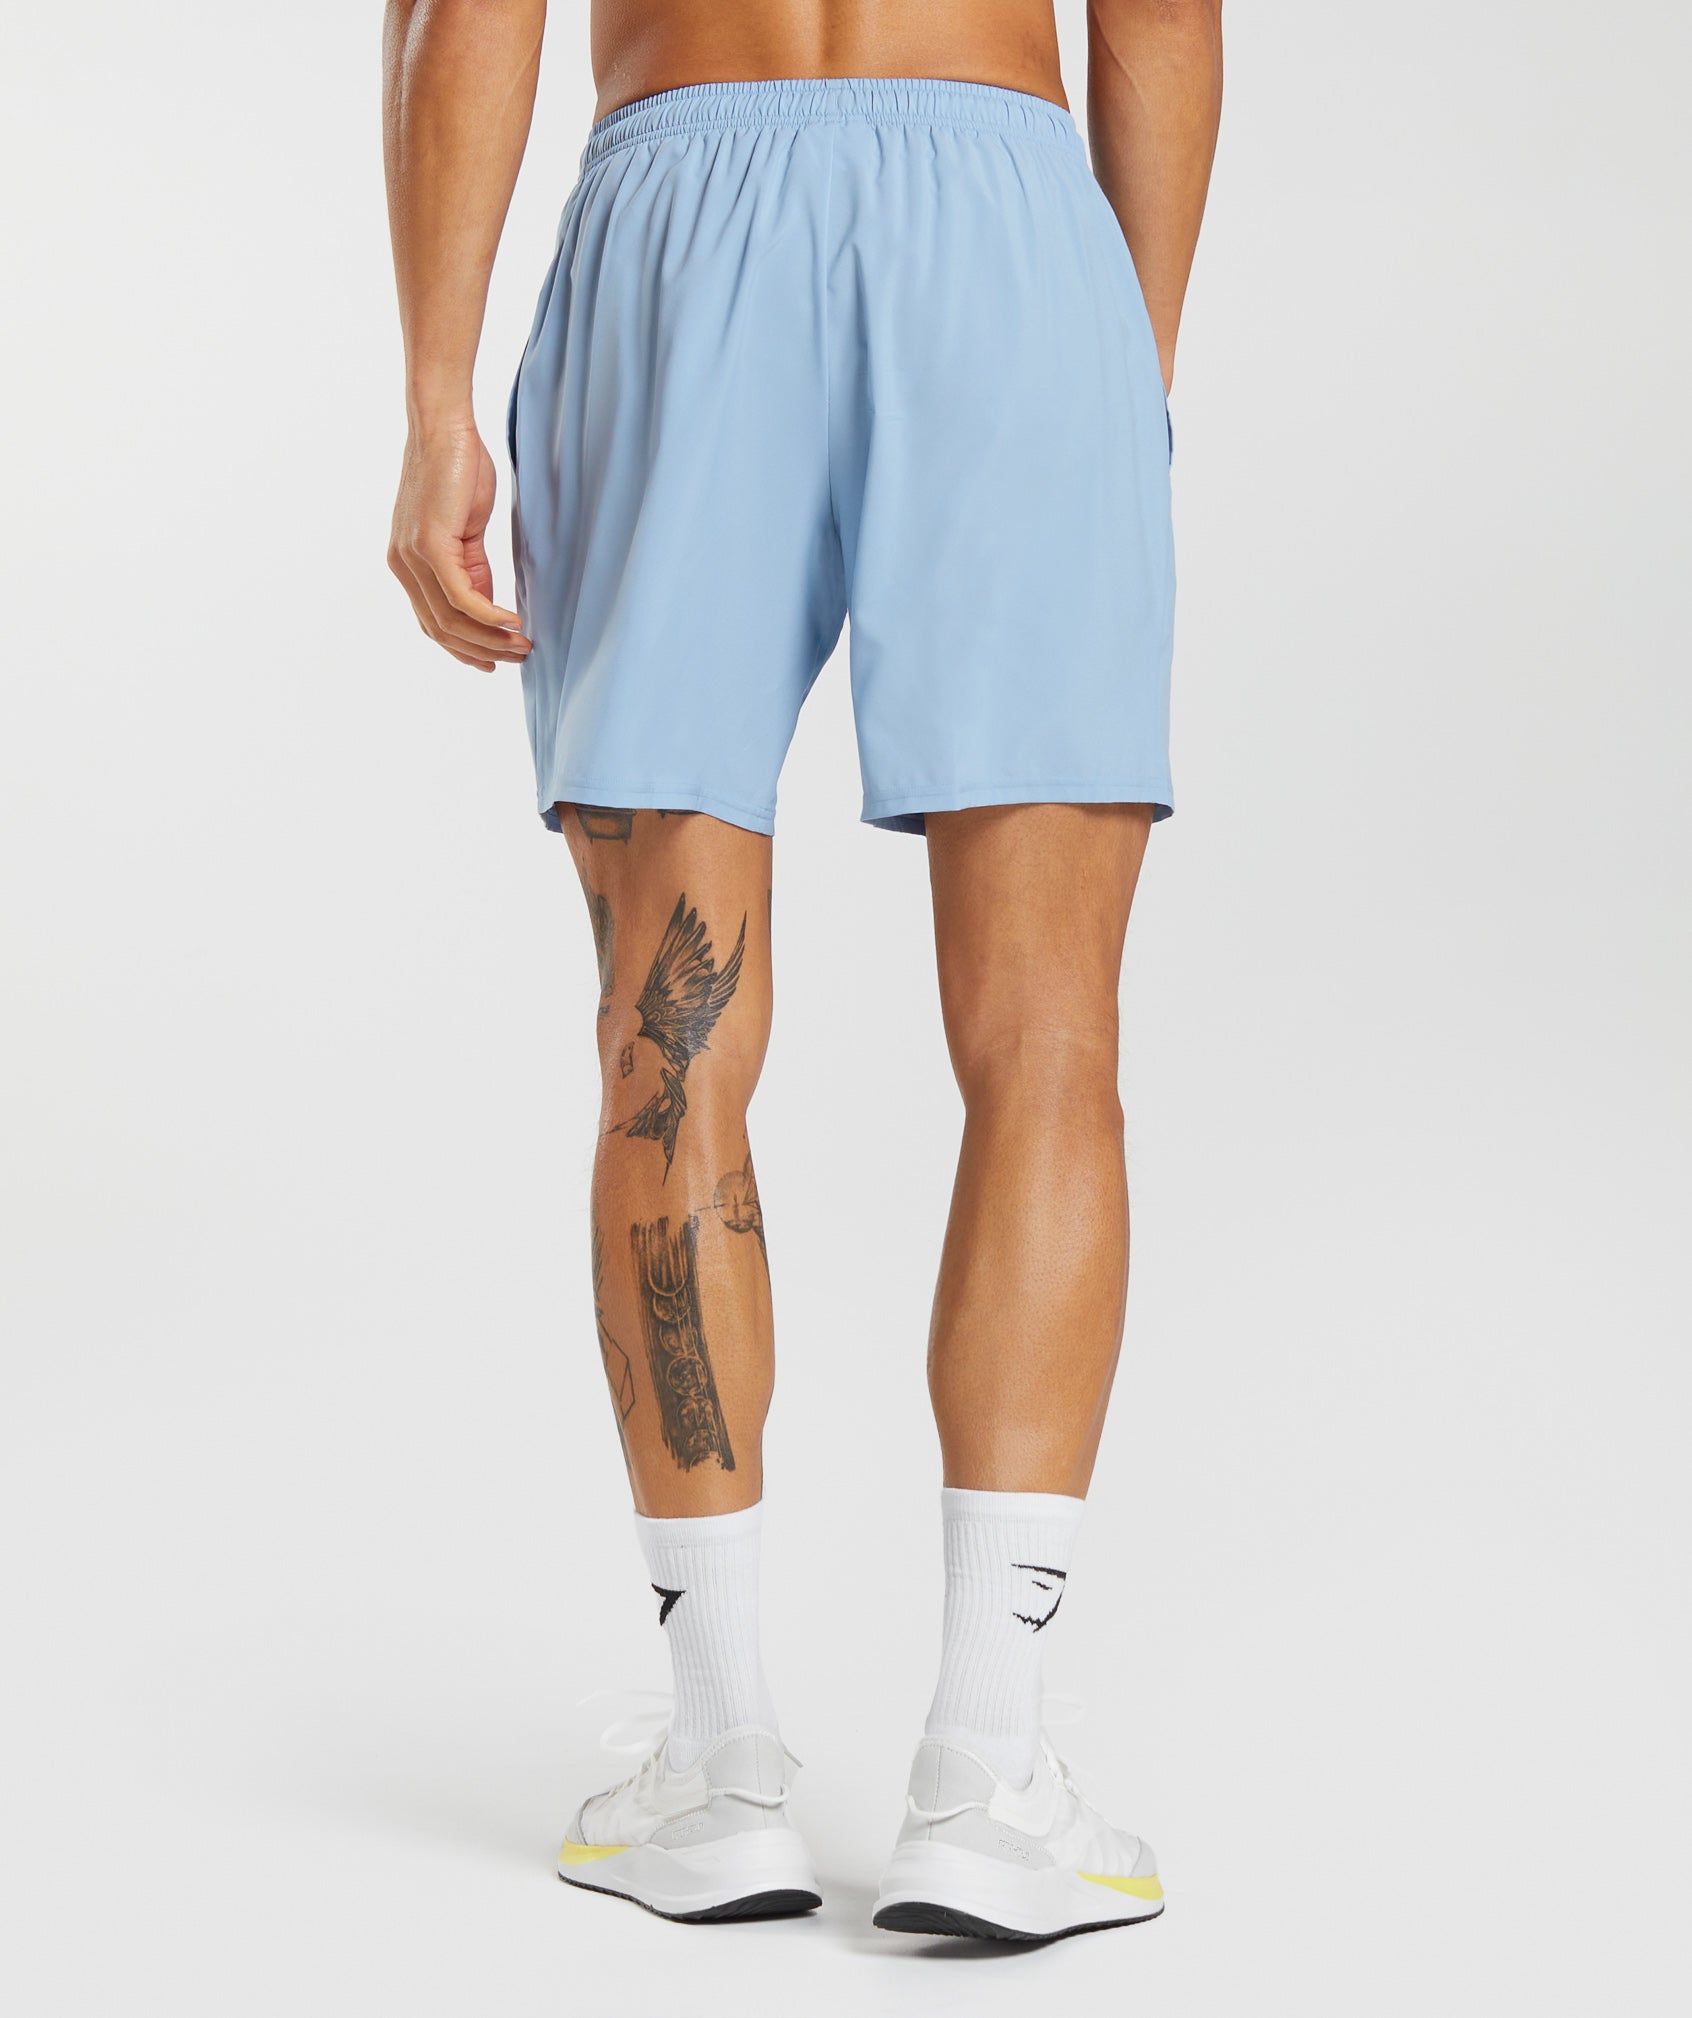 Arrival 7" Shorts in Ozone Blue - view 2